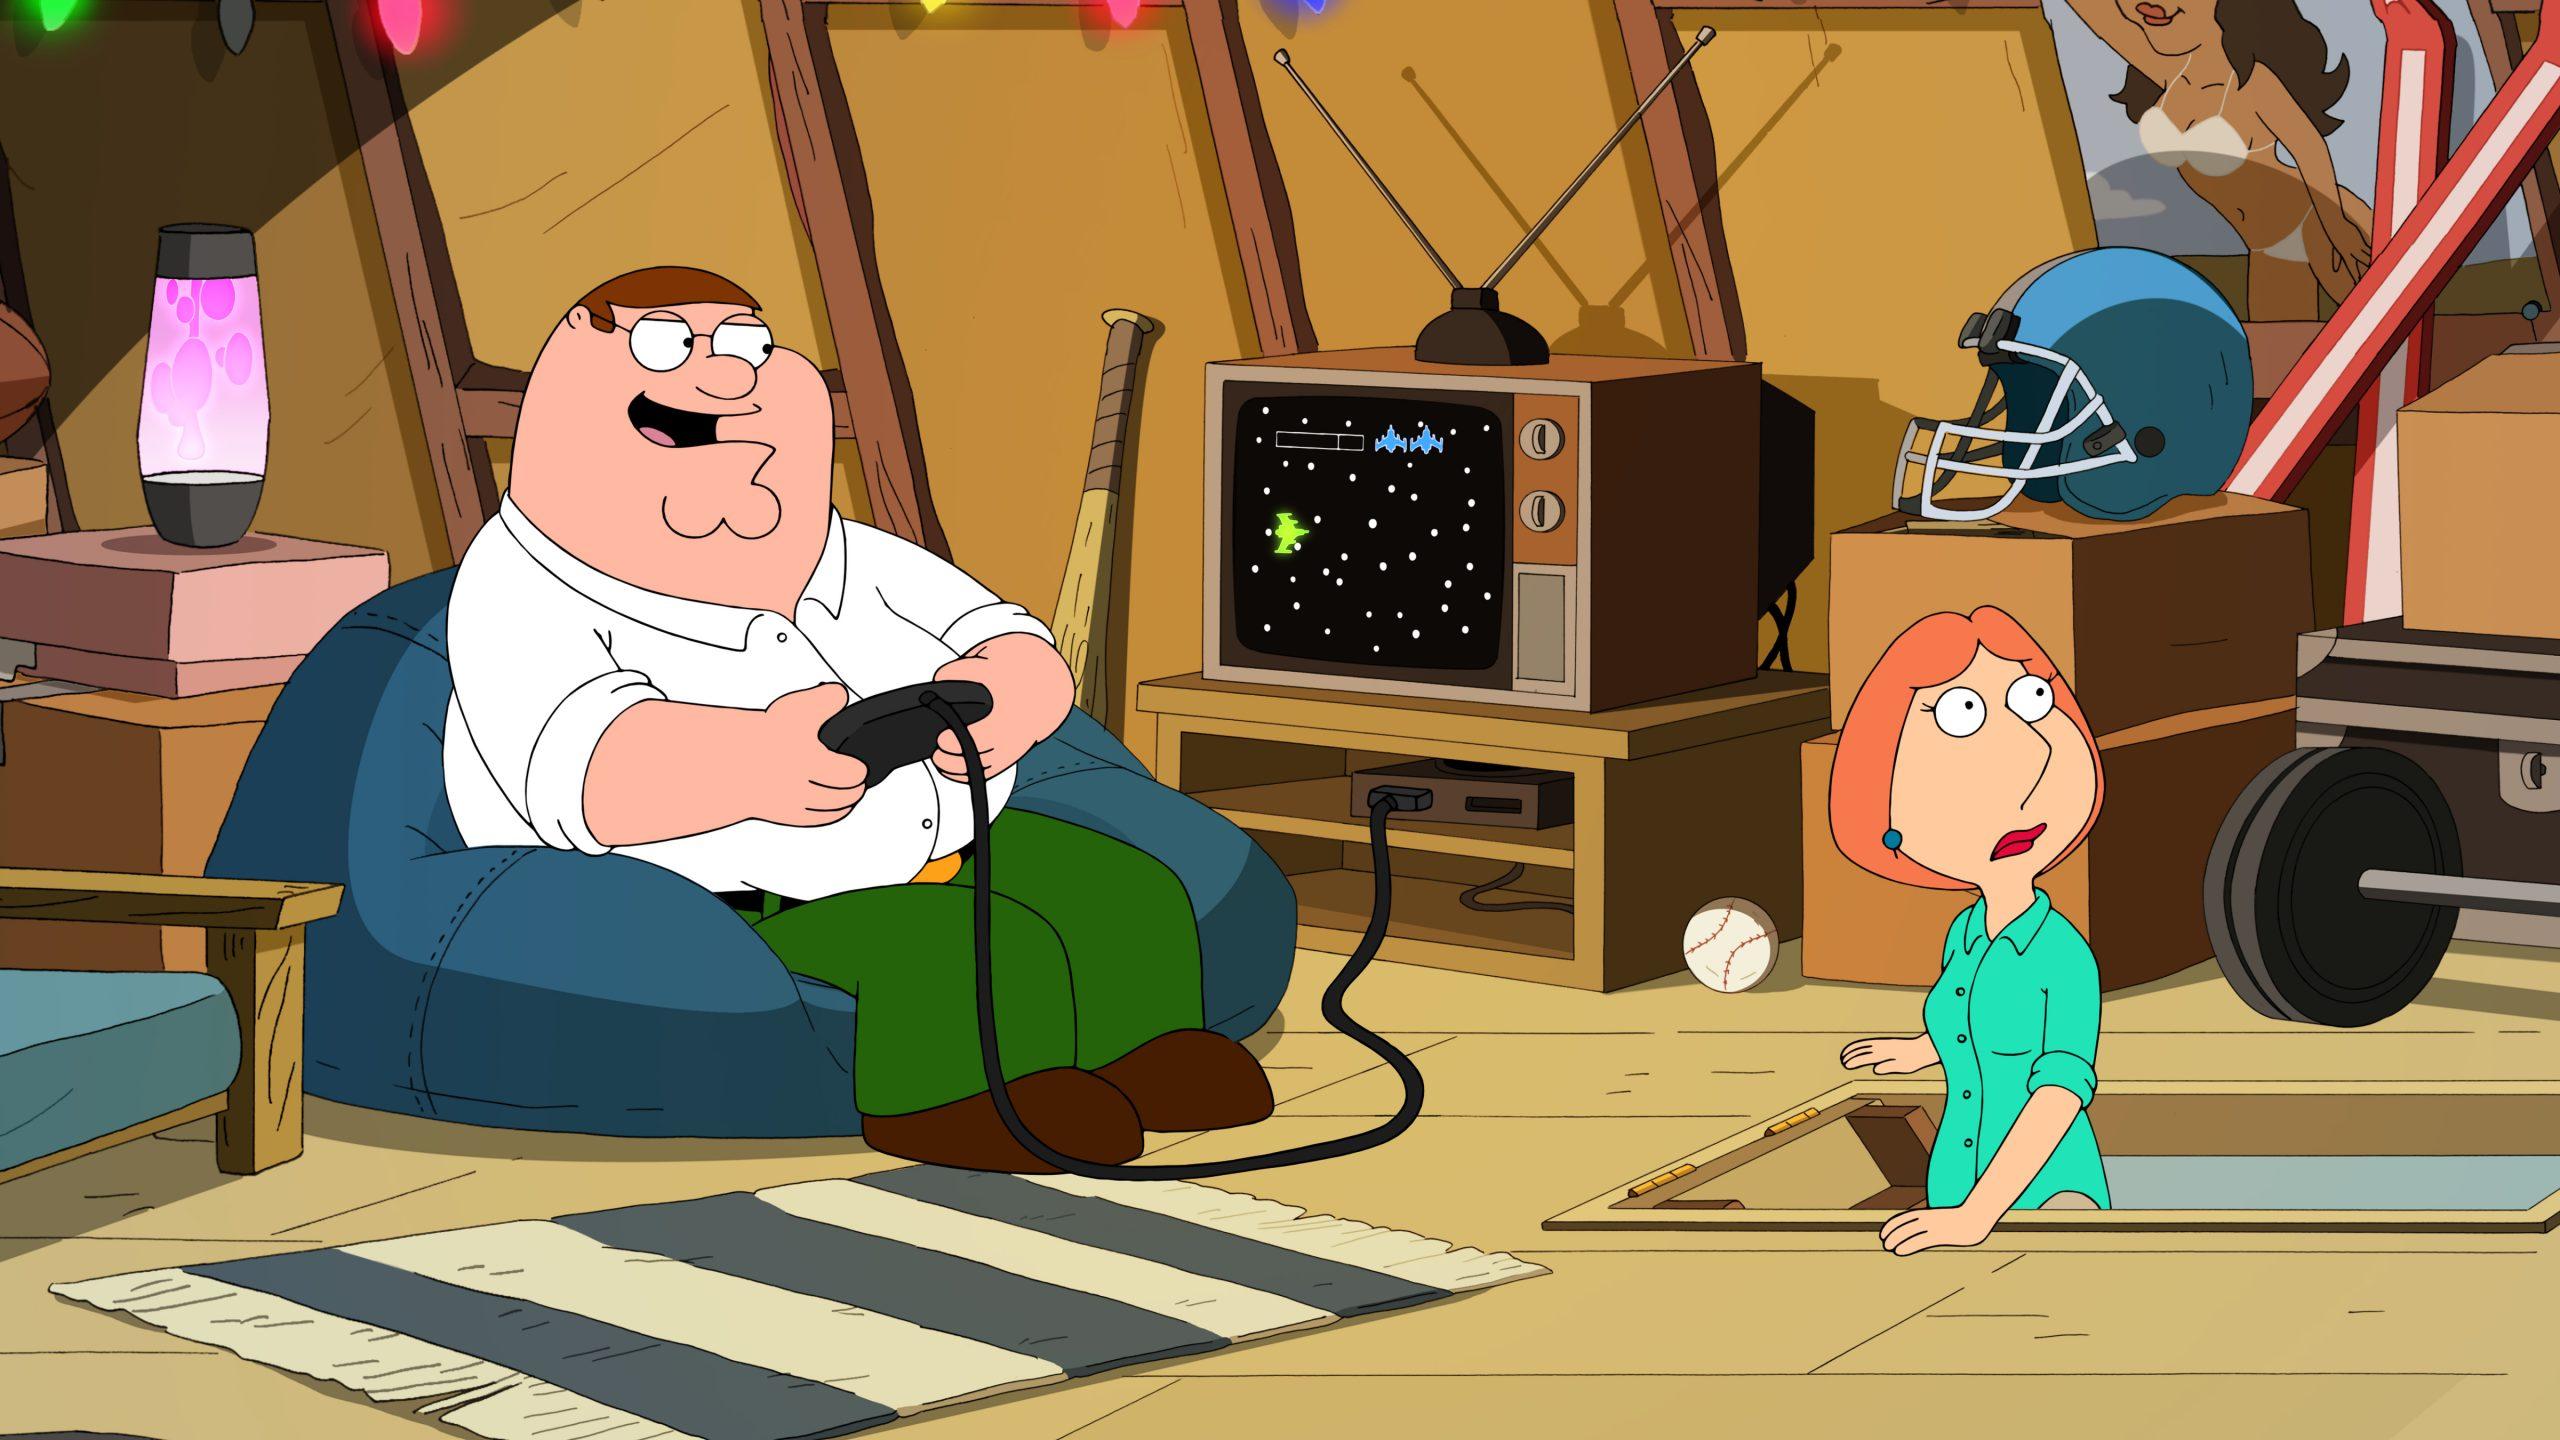 Wallpaper Of Peter And Lois Griffin From Family Guy